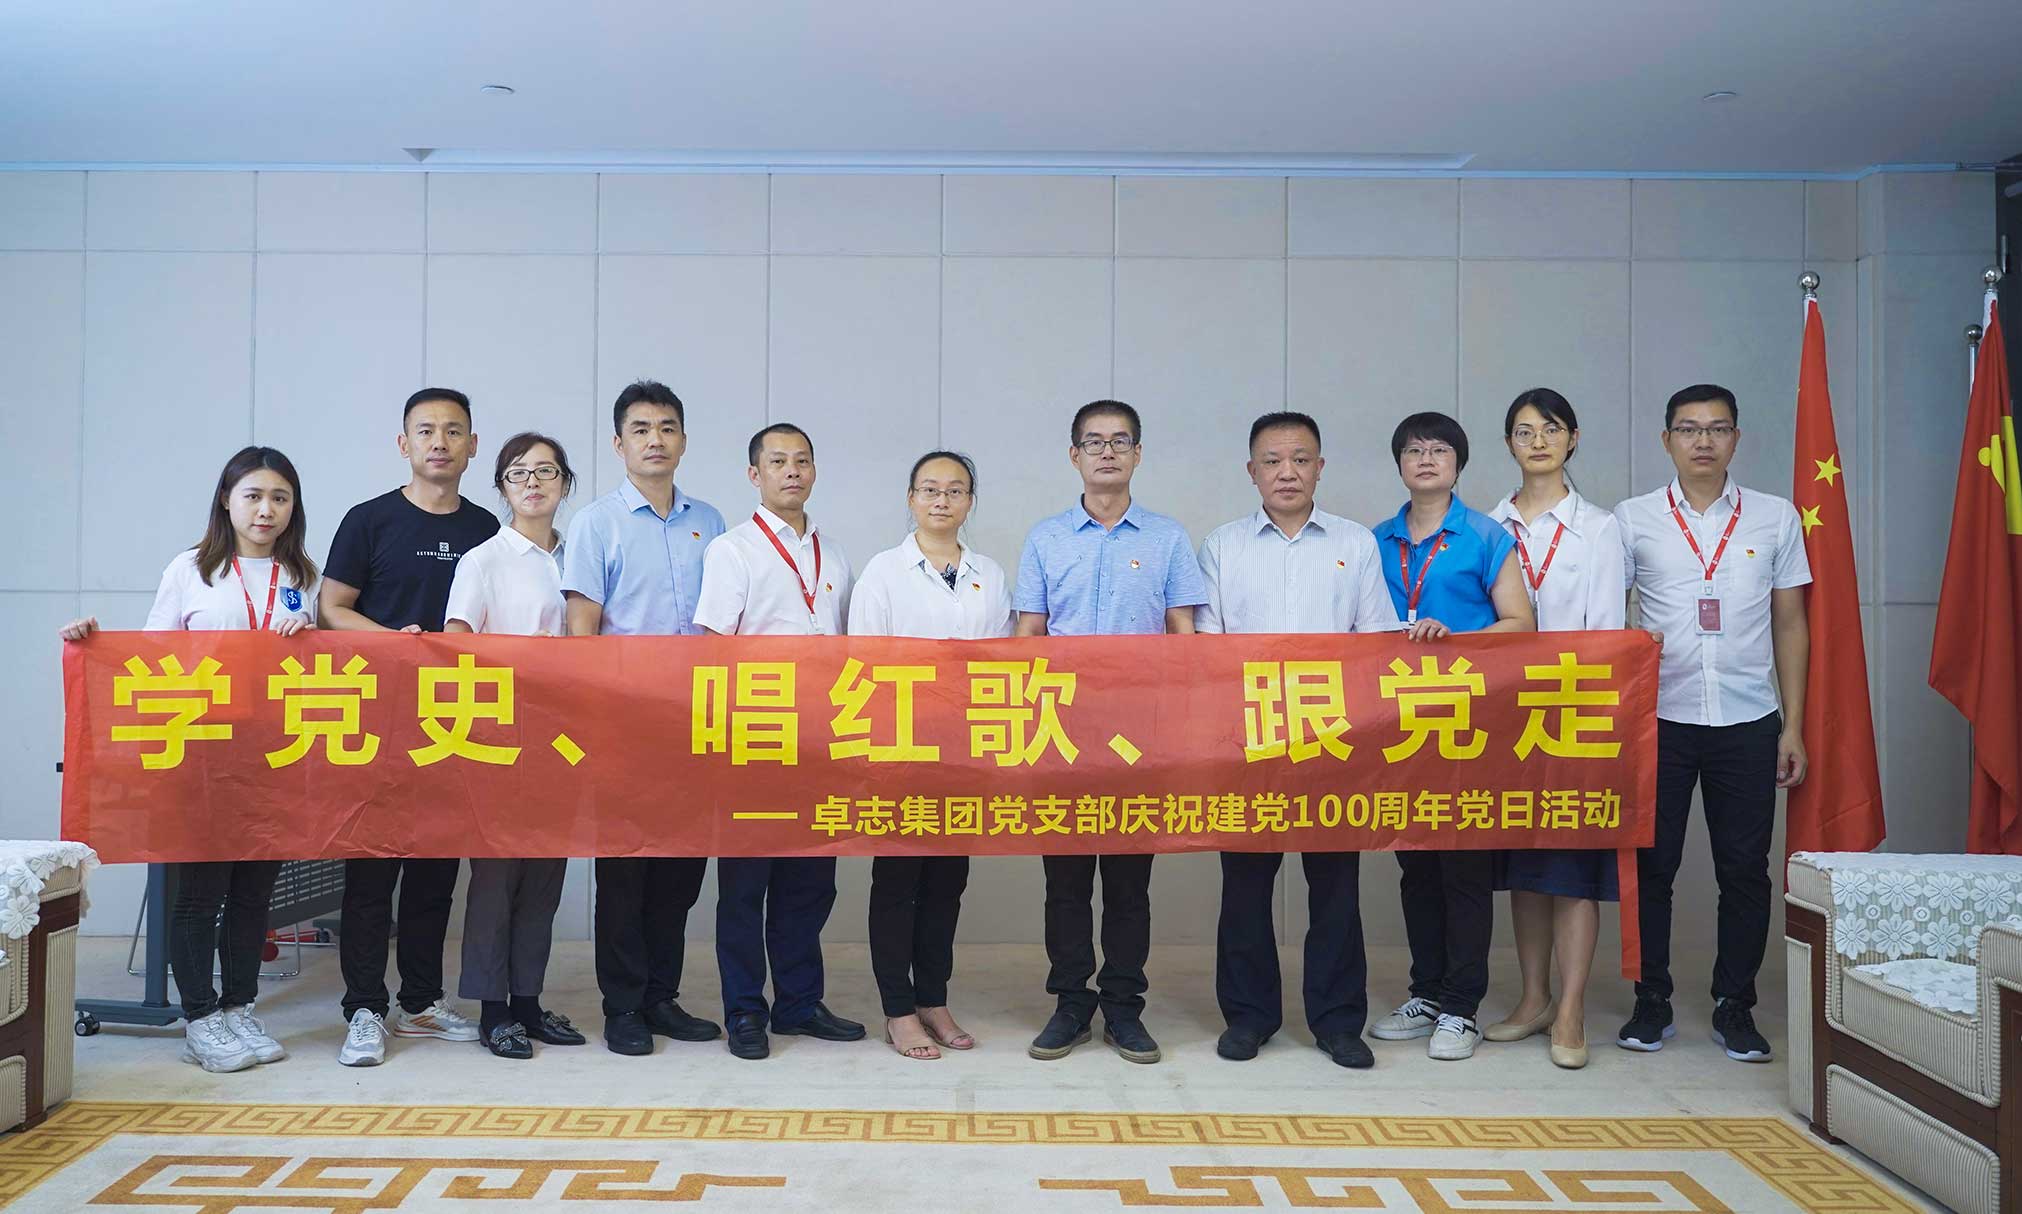 Learning Party History, Singing Red Songs, and Following the Party's Teaching: Top Ideal CPC Branch's activities to celebrate the centenary of the CPC's founding